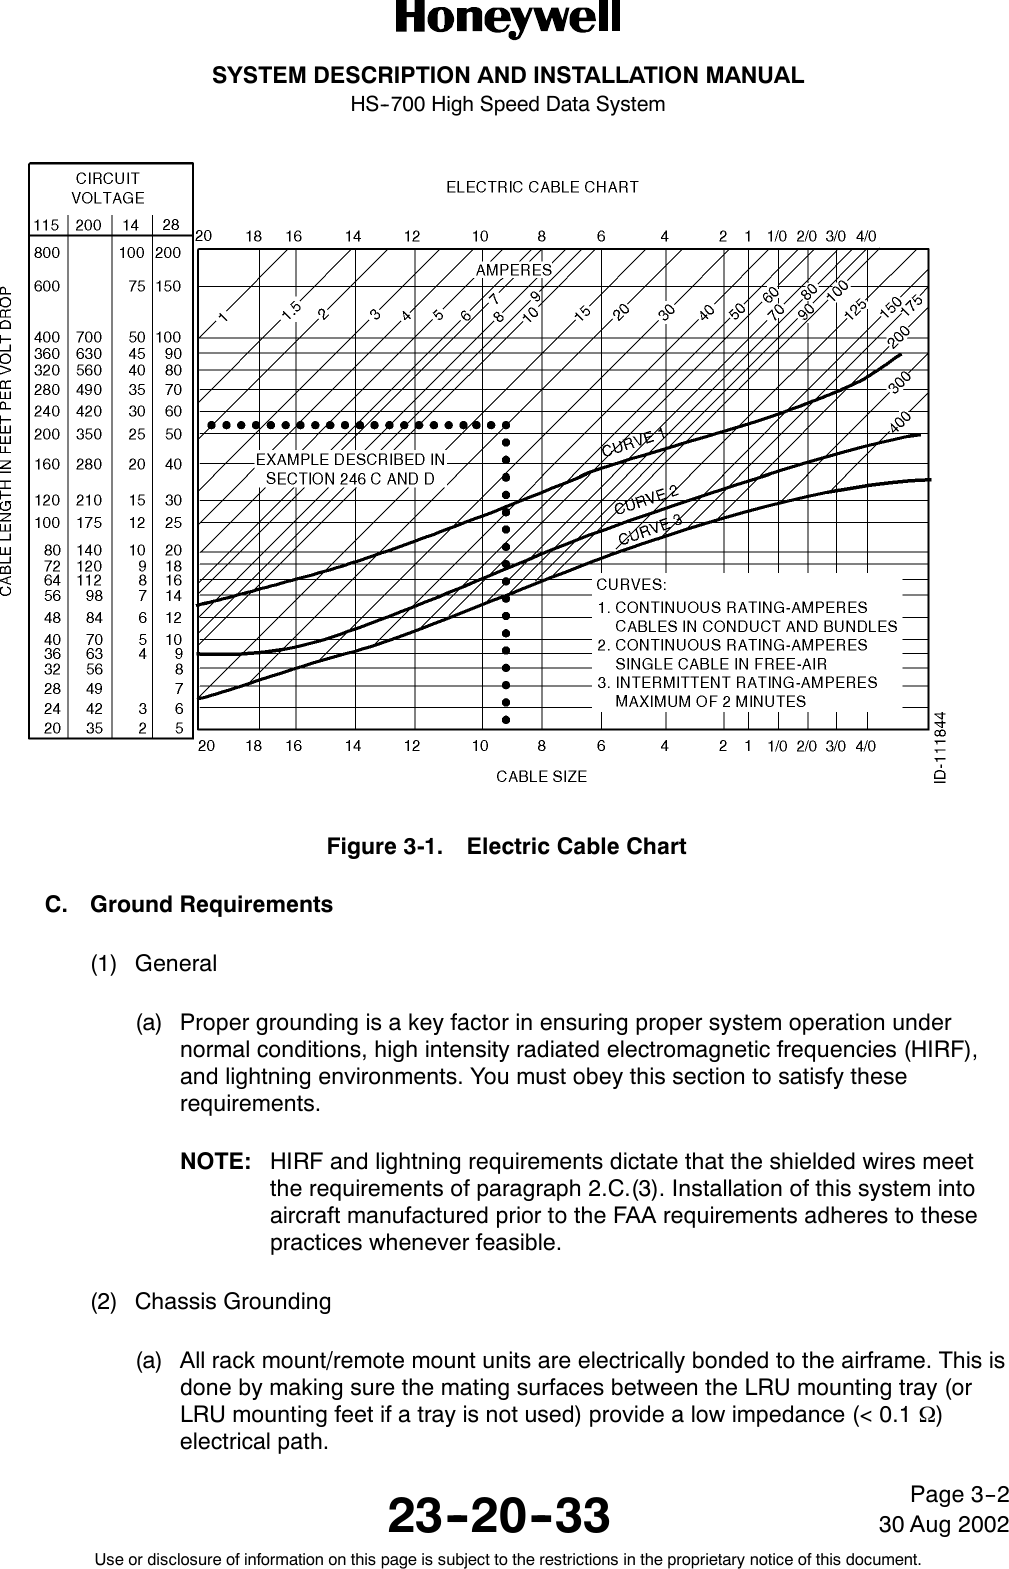 SYSTEM DESCRIPTION AND INSTALLATION MANUALHS--700 High Speed Data System23--20--3330 Aug 2002Use or disclosure of information on this page is subject to the restrictions in the proprietary notice of this document.Page 3--2Figure 3-1. Electric Cable ChartC. Ground Requirements(1) General(a) Proper grounding is a key factor in ensuring proper system operation undernormal conditions, high intensity radiated electromagnetic frequencies (HIRF),and lightning environments. You must obey this section to satisfy theserequirements.NOTE: HIRF and lightning requirements dictate that the shielded wires meetthe requirements of paragraph 2.C.(3). Installation of this system intoaircraft manufactured prior to the FAA requirements adheres to thesepractices whenever feasible.(2) Chassis Grounding(a) All rack mount/remote mount units are electrically bonded to the airframe. This isdone by making sure the mating surfaces between the LRU mounting tray (orLRU mounting feet if a tray is not used) provide a low impedance (&lt; 0.1 Ω)electrical path.